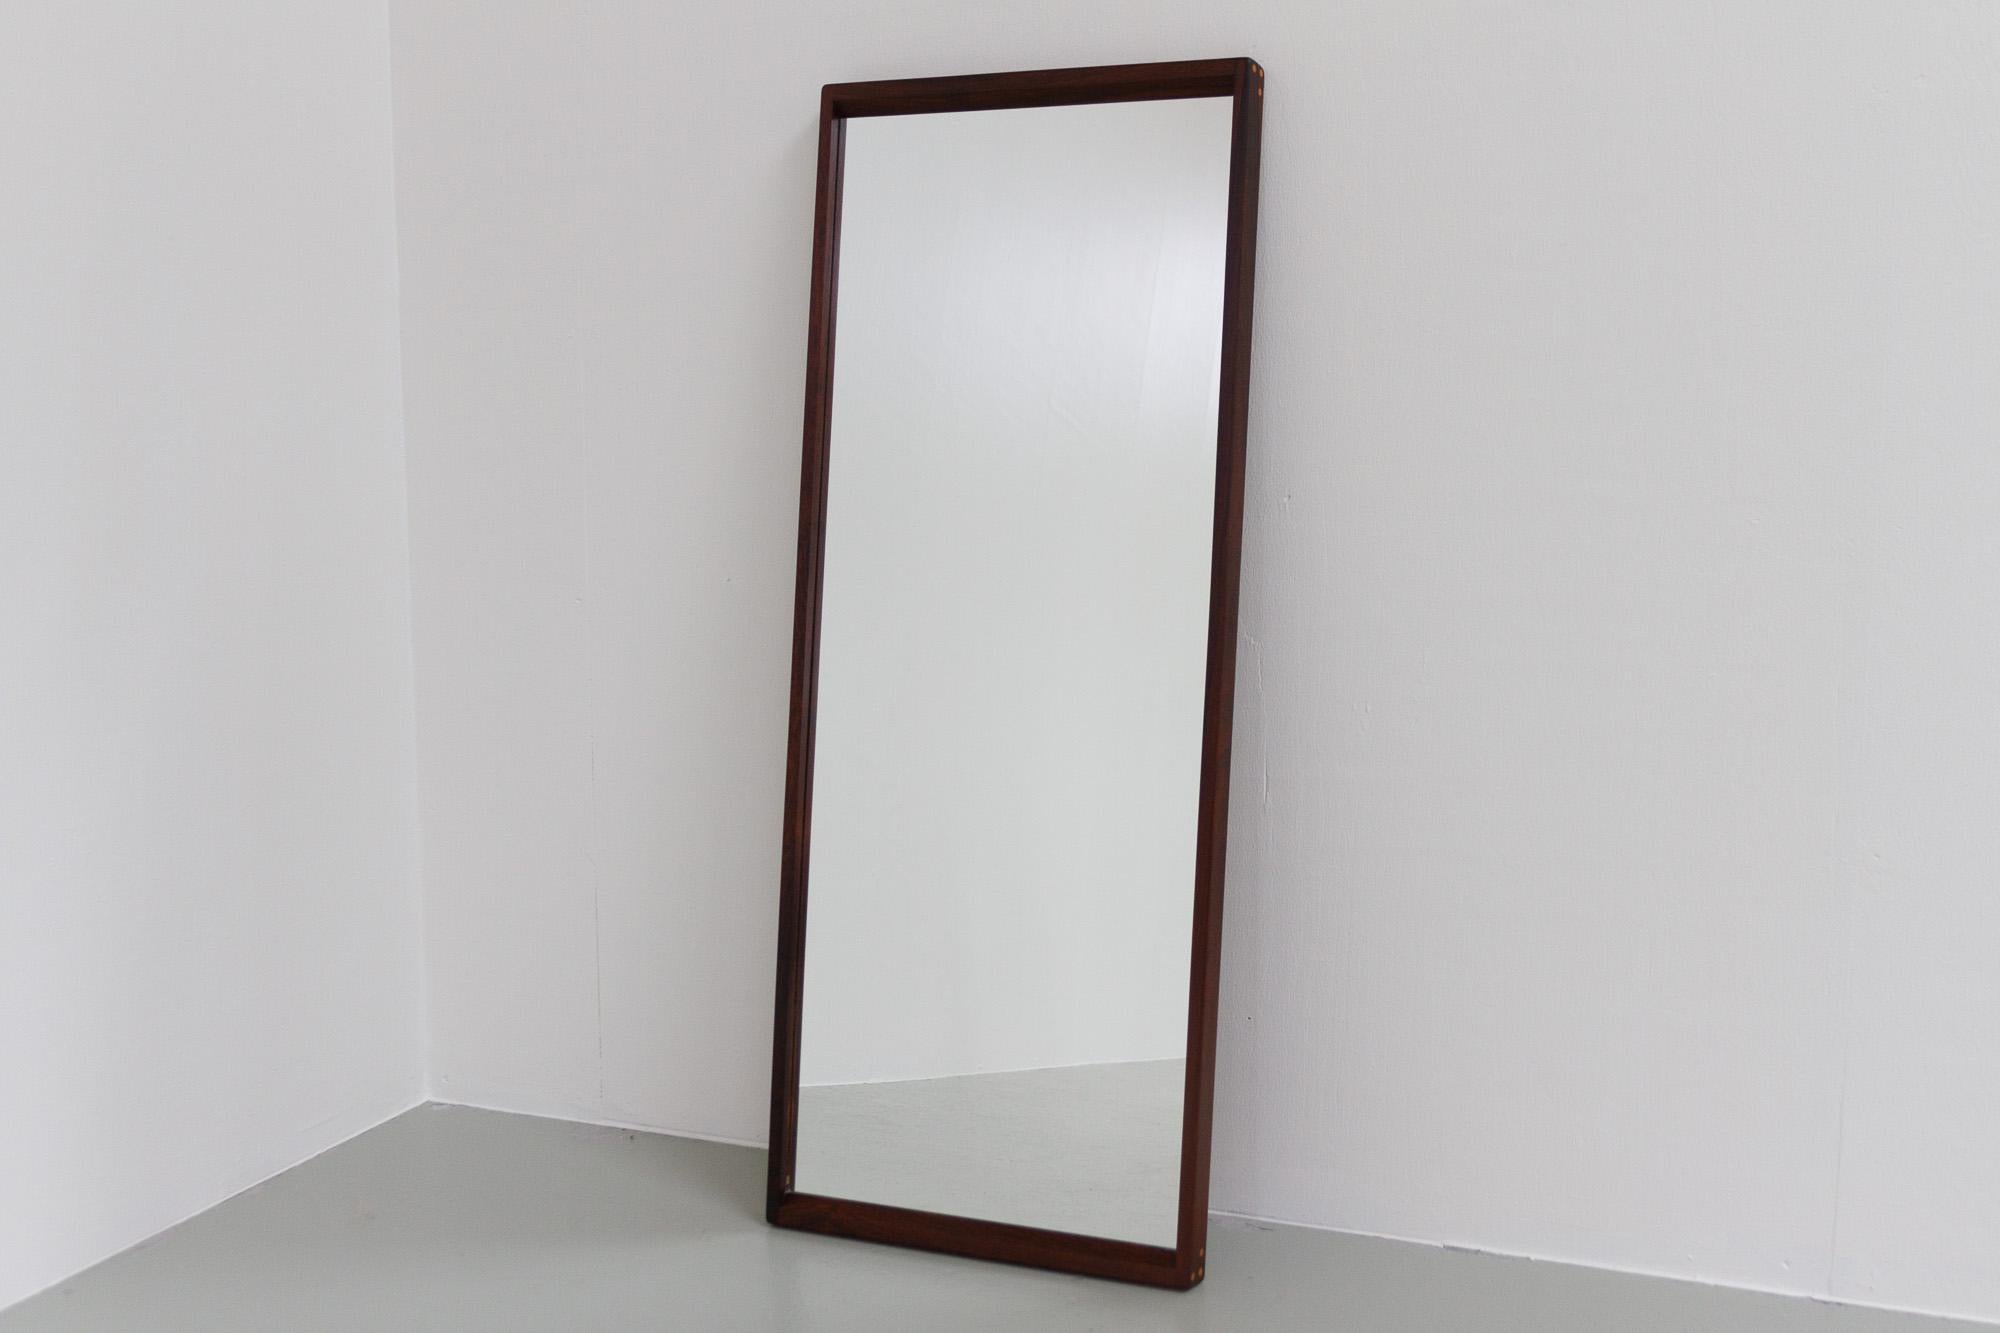 Vintage Danish rosewood wall mirror by Aksel Kjersgaard, 1960s.
Elegant Danish Modern tall wall mirror Model No. 145 designed by Danish architect Kai Kristiansen and manufactured by Aksel Kjersgaard, Odder, Denmark. Frame in solid rosewood with